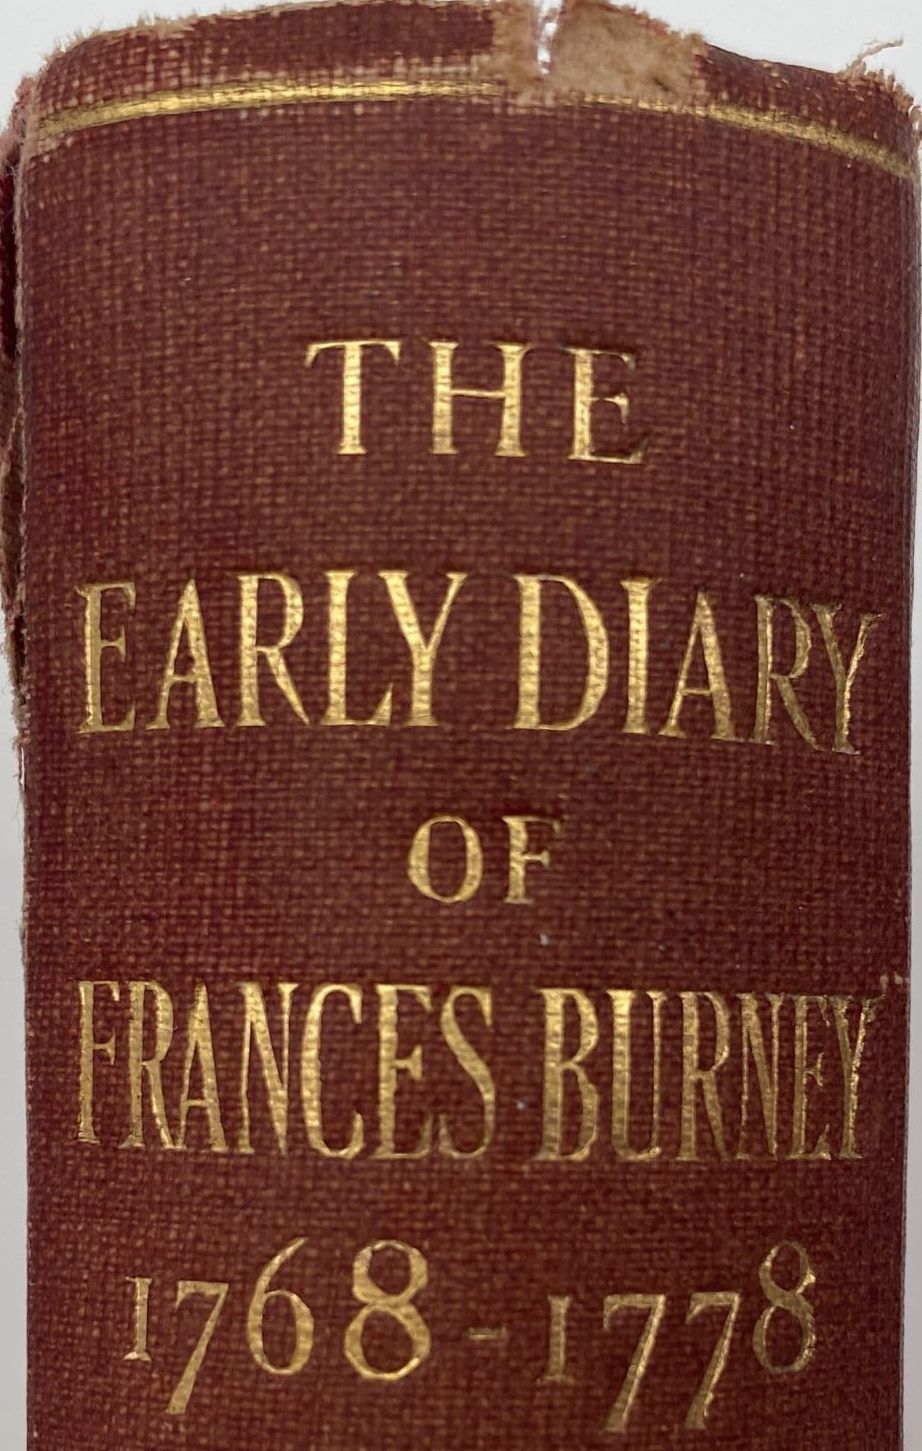 THE EARLY DIARY OF Frances Burney 1768-1778